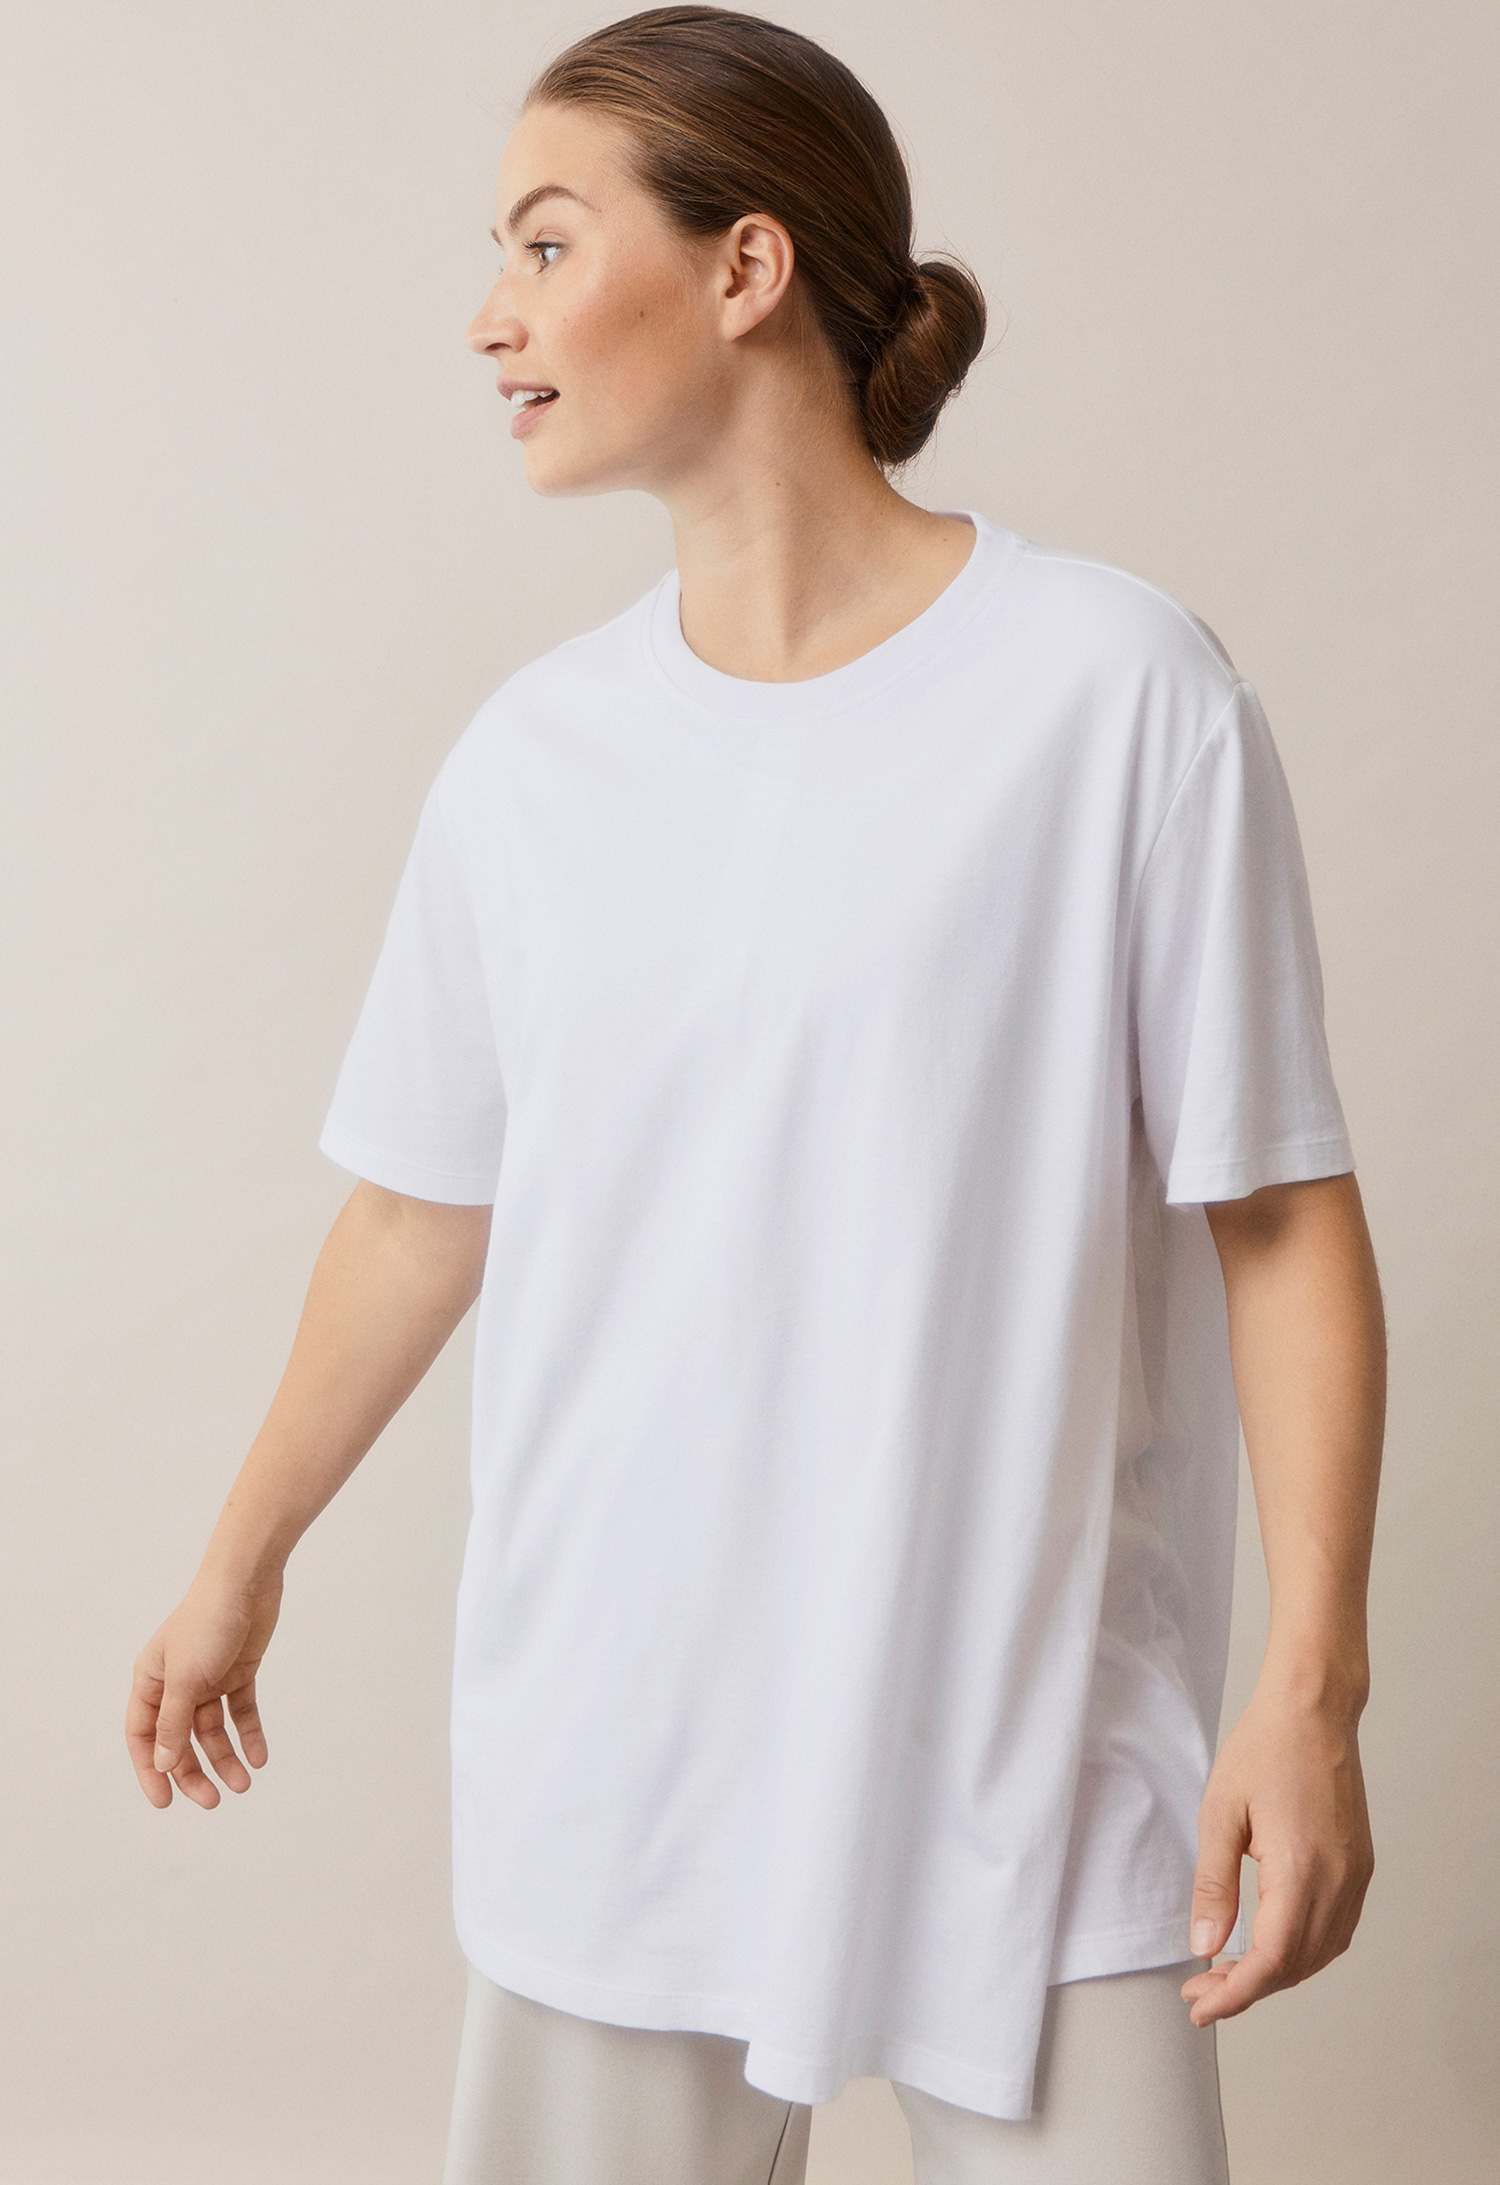 Oversized t-shirt with nursing access - White product